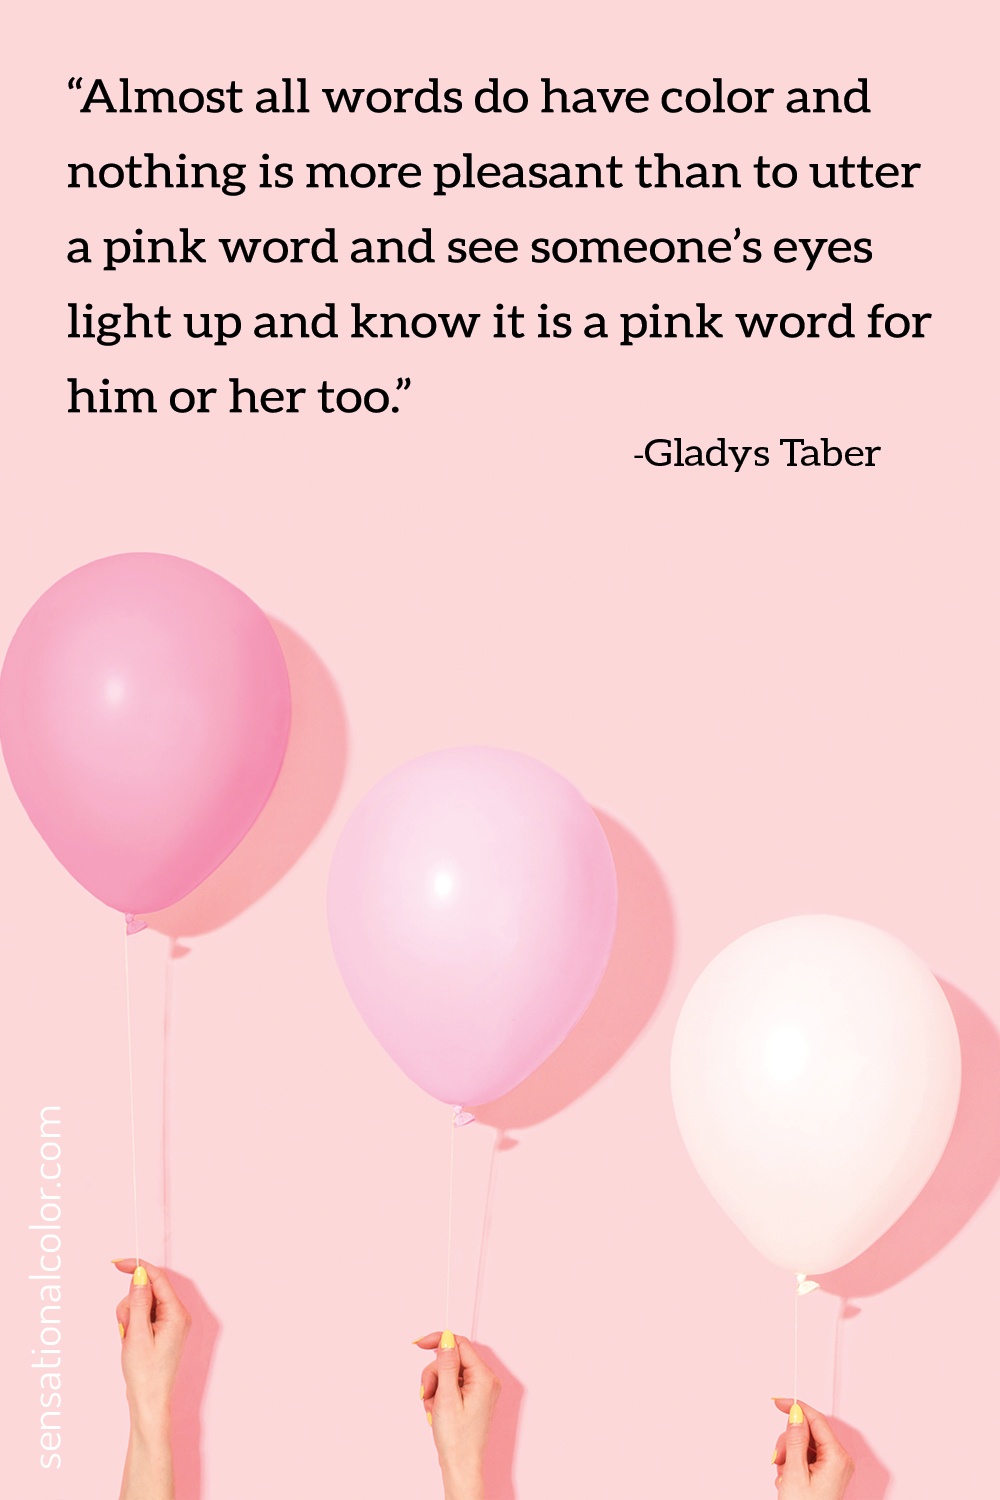 “Almost all words do have color and nothing is more pleasant than to utter a pink word and see someone’s eyes light up and know it is a pink word for him or her too.” -- Gladys Taber